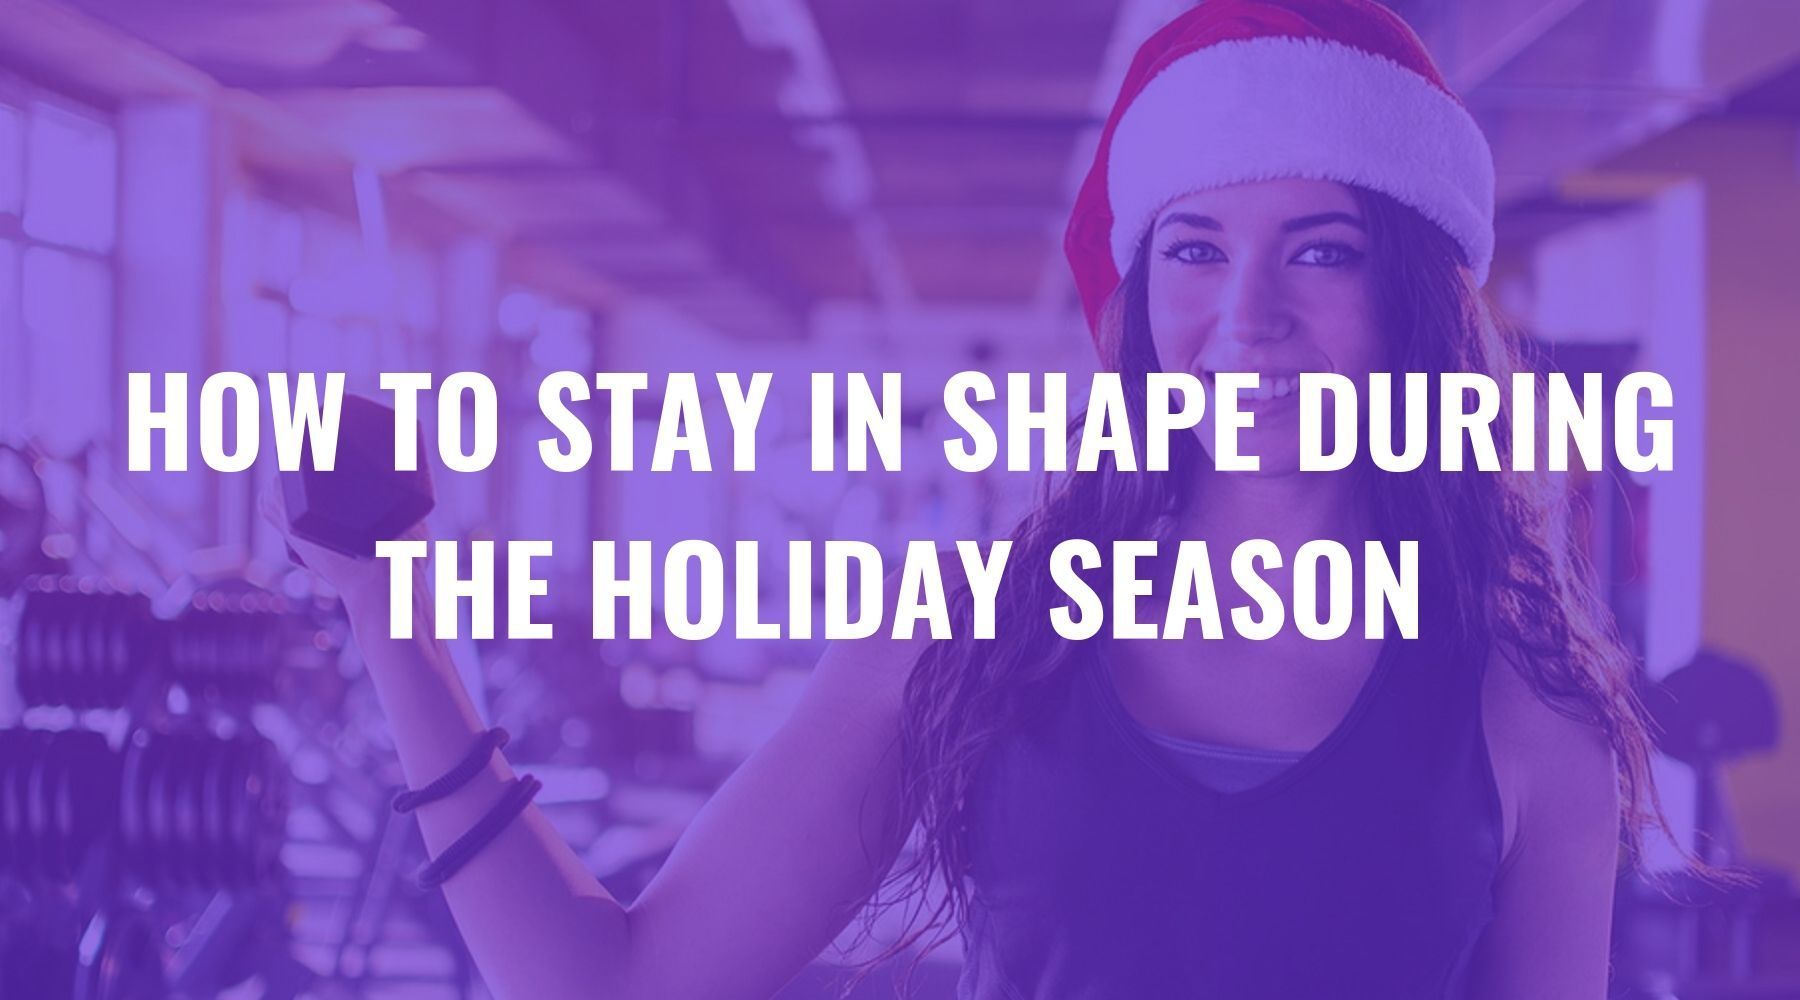 How to Stay in Shape During the Holiday Season